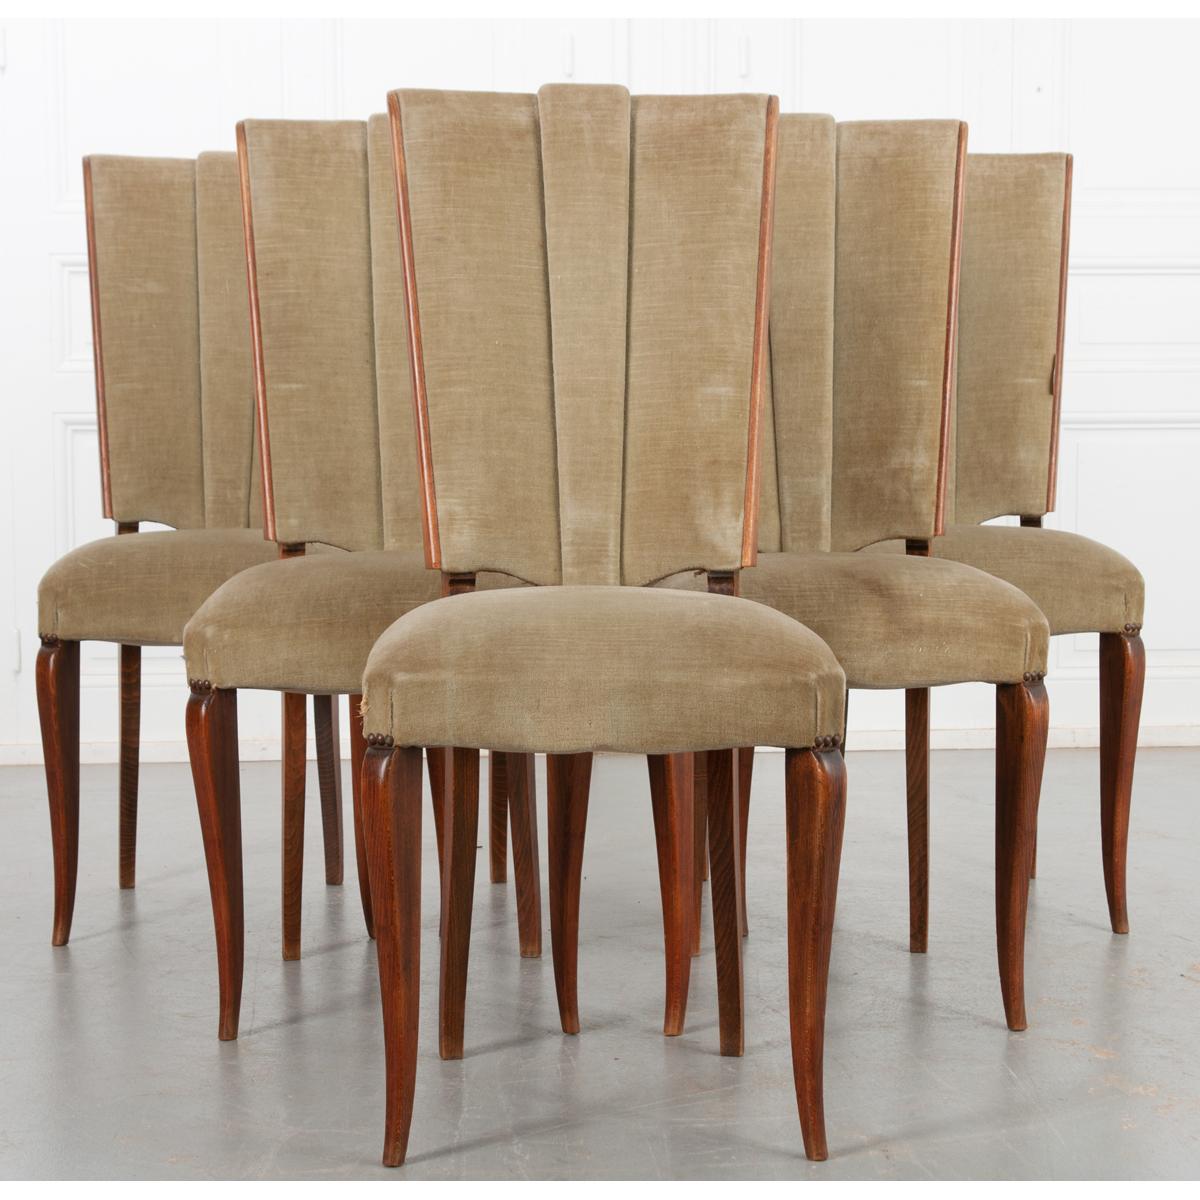 This lovely set of six dining room chairs are made of oak and velvet upholstery. Comfortable, nicely shaped seat backs have a wonderful vintage quality. Sleek, polished legs support the chairs and compliment the overall design. There are some signs